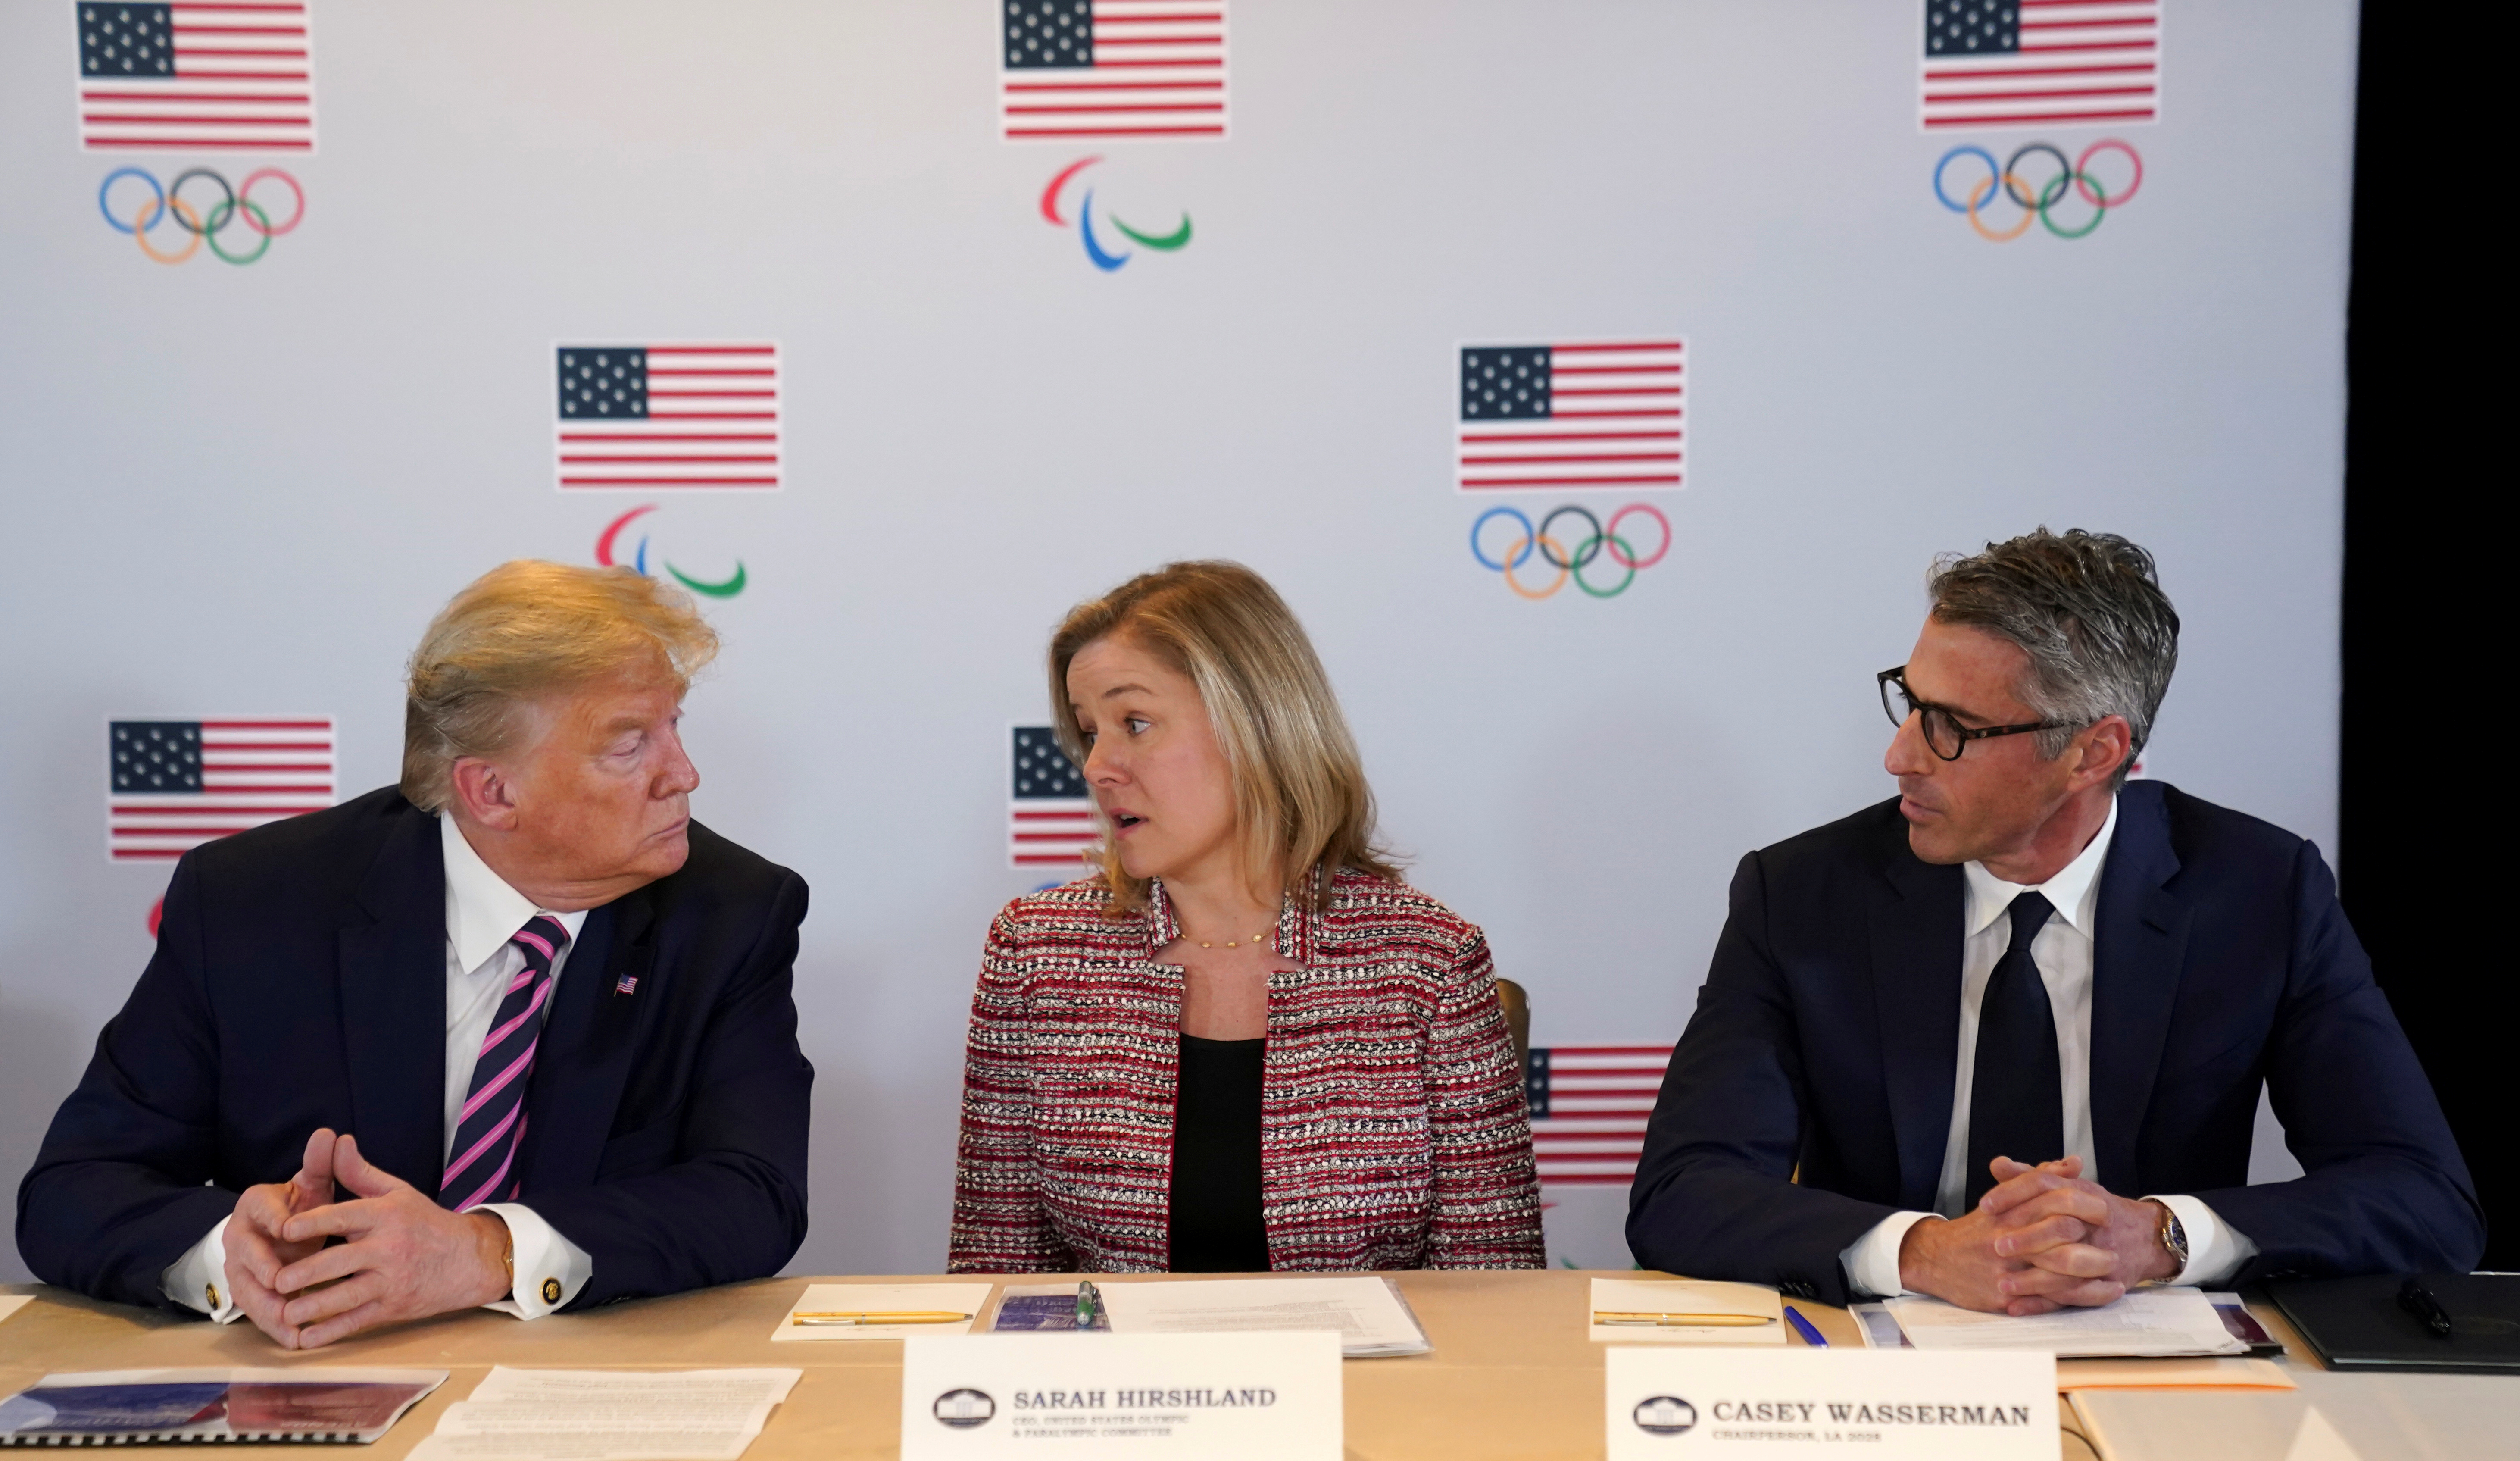 FILE PHOTO: U.S. President Donald Trump talks with Sarah Hirshland, CEO of the United States Olympic & Paralympic Committee and Casey Wasserman, chairman of LA 2028, during an LA 2028 Olympic briefing in Los Angeles, California, February 18, 2020. REUTERS/Kevin Lamarque/File Photo